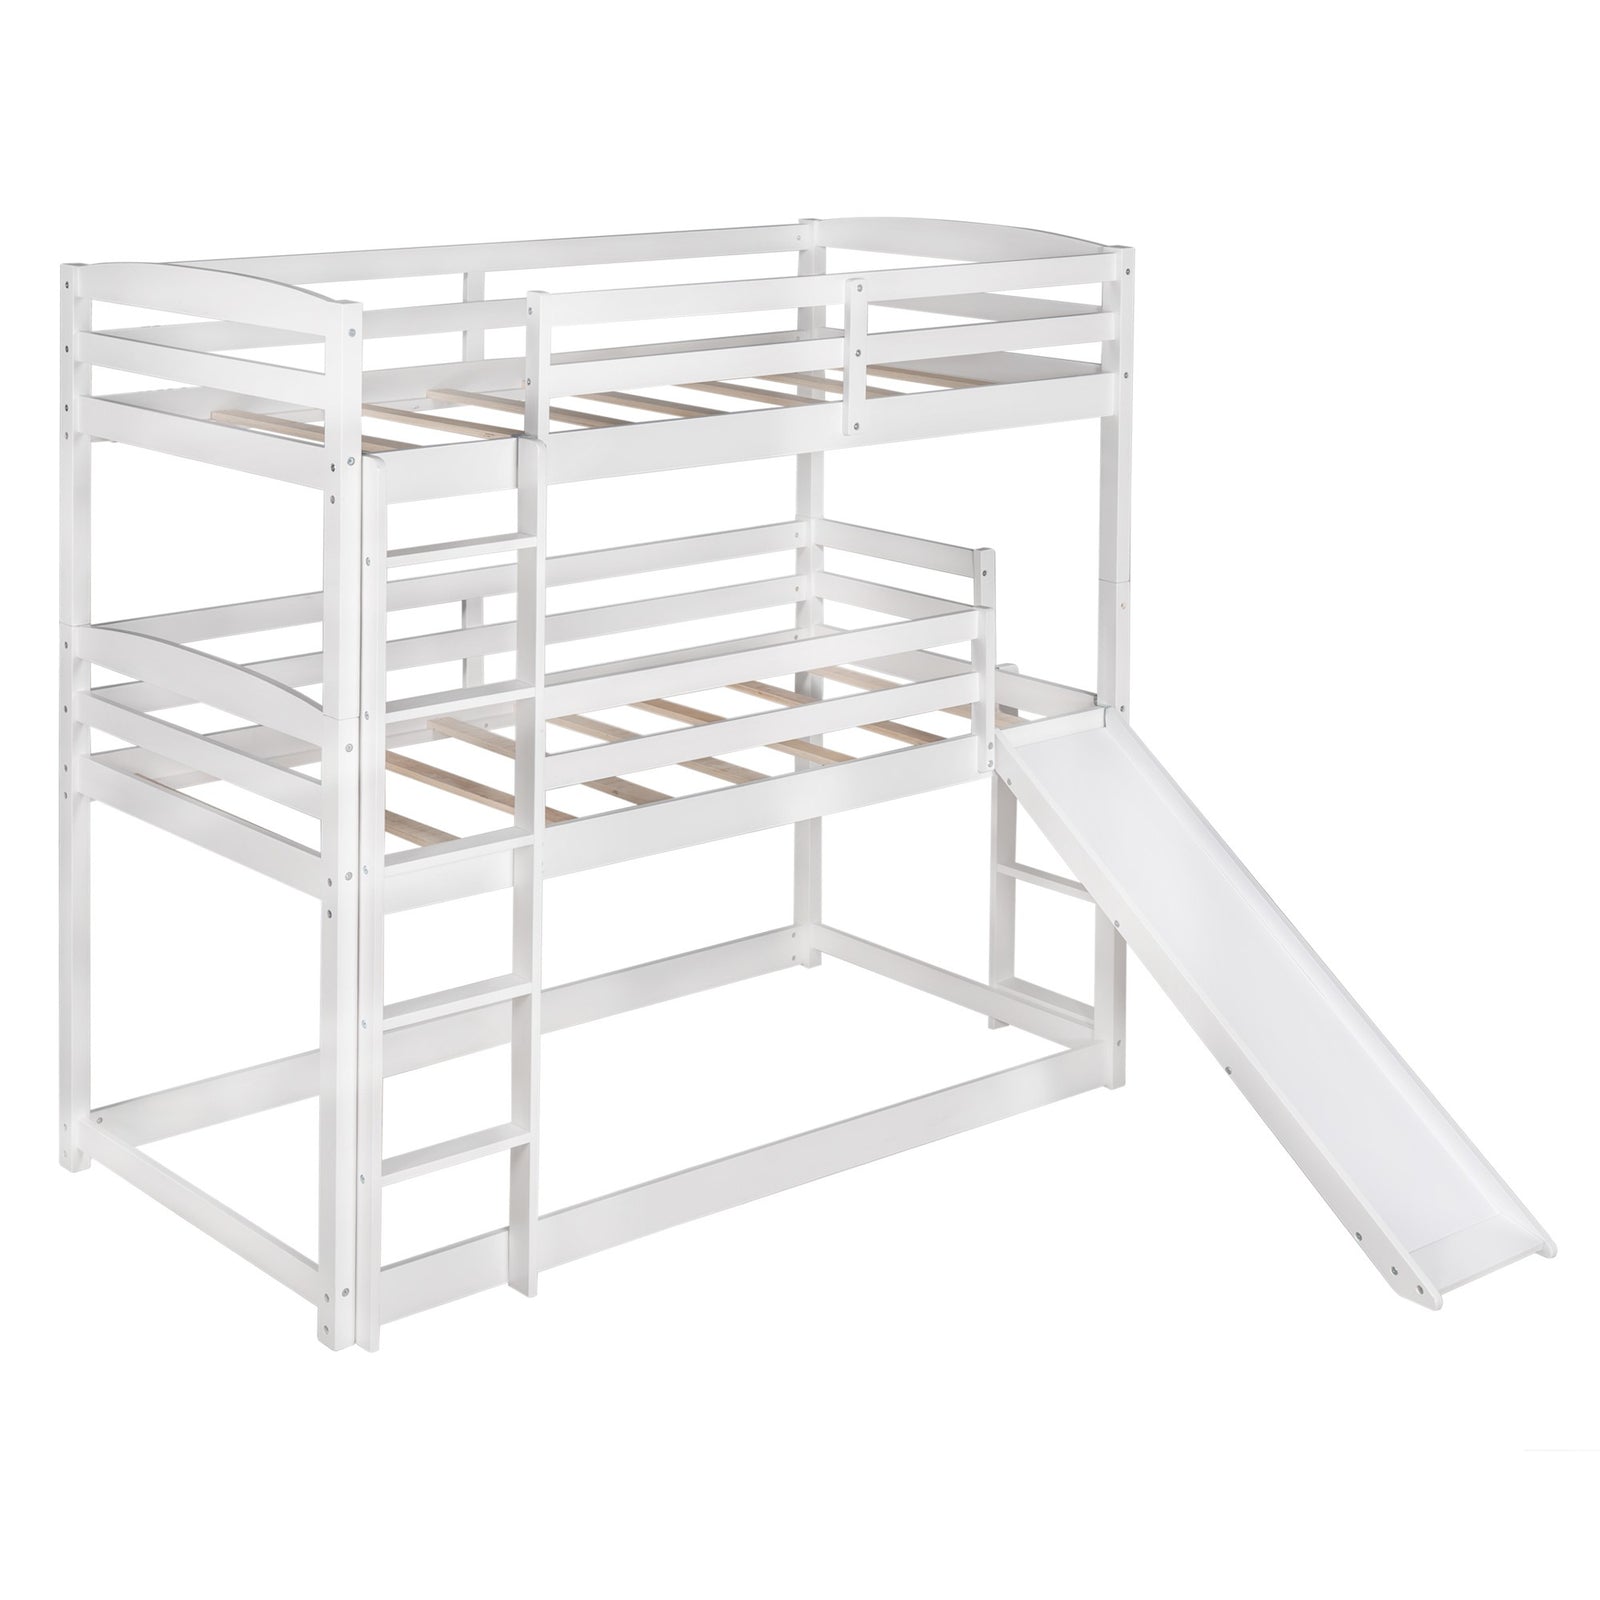 White Triple Bunk Twin Sized Bed with Slide